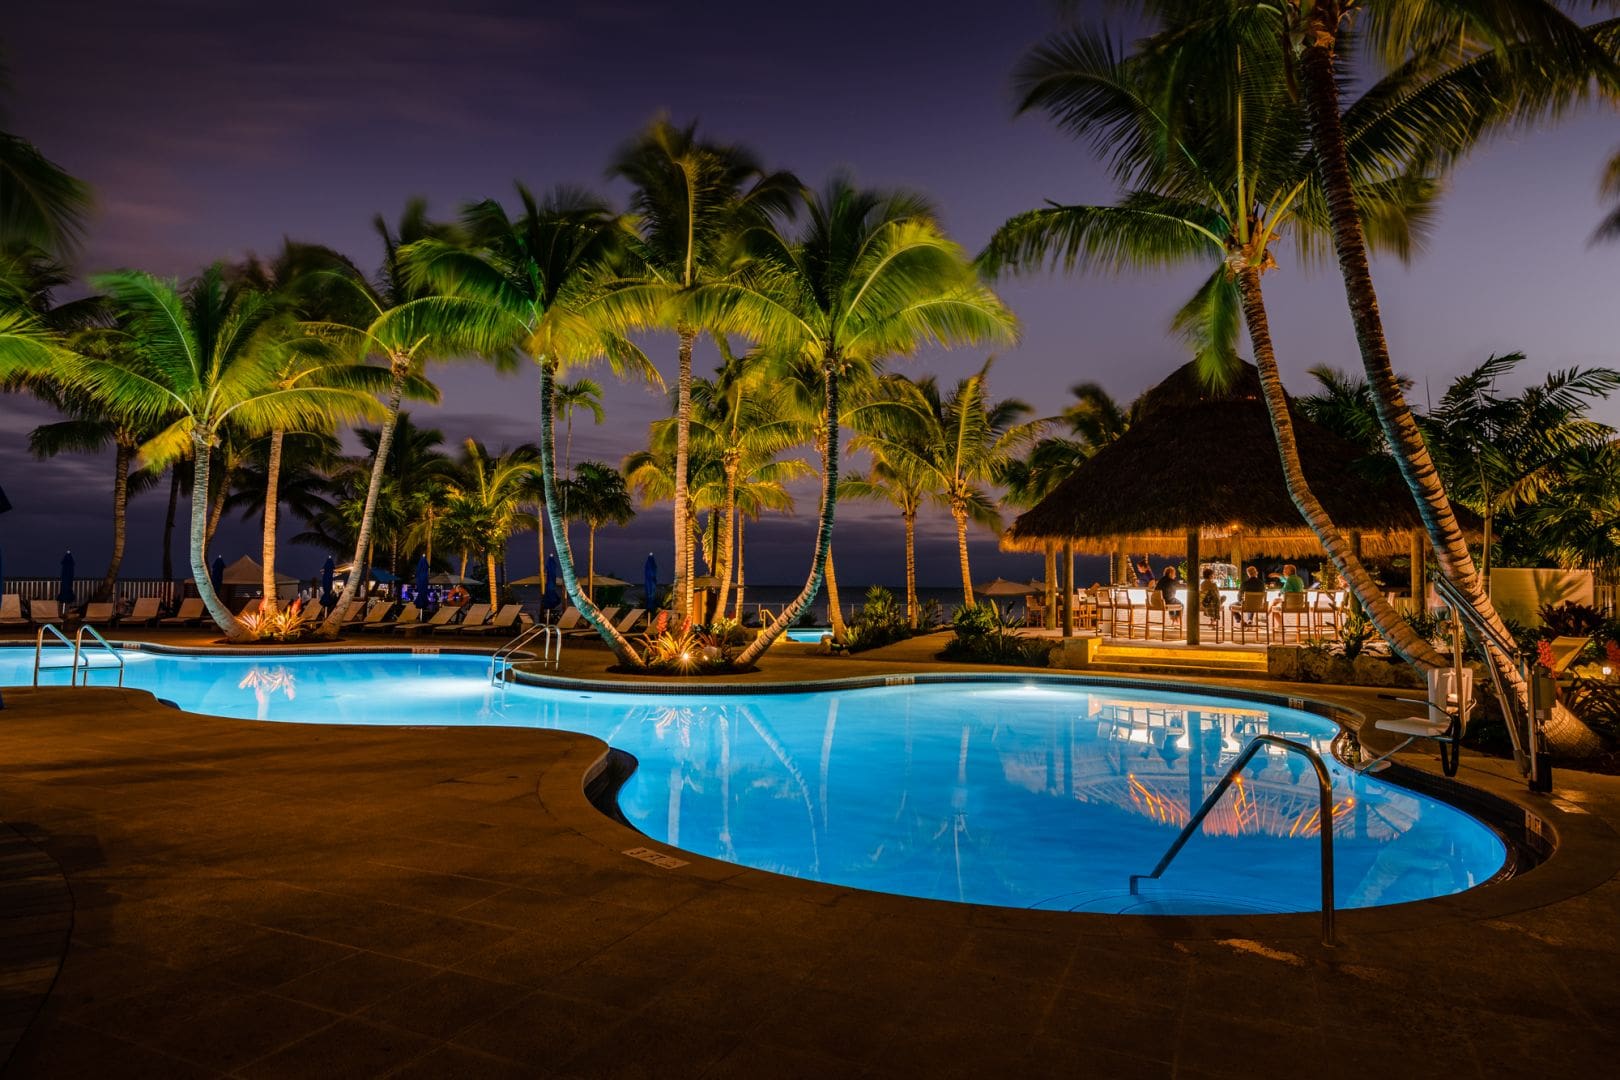 A pool at night with palm trees in the background.